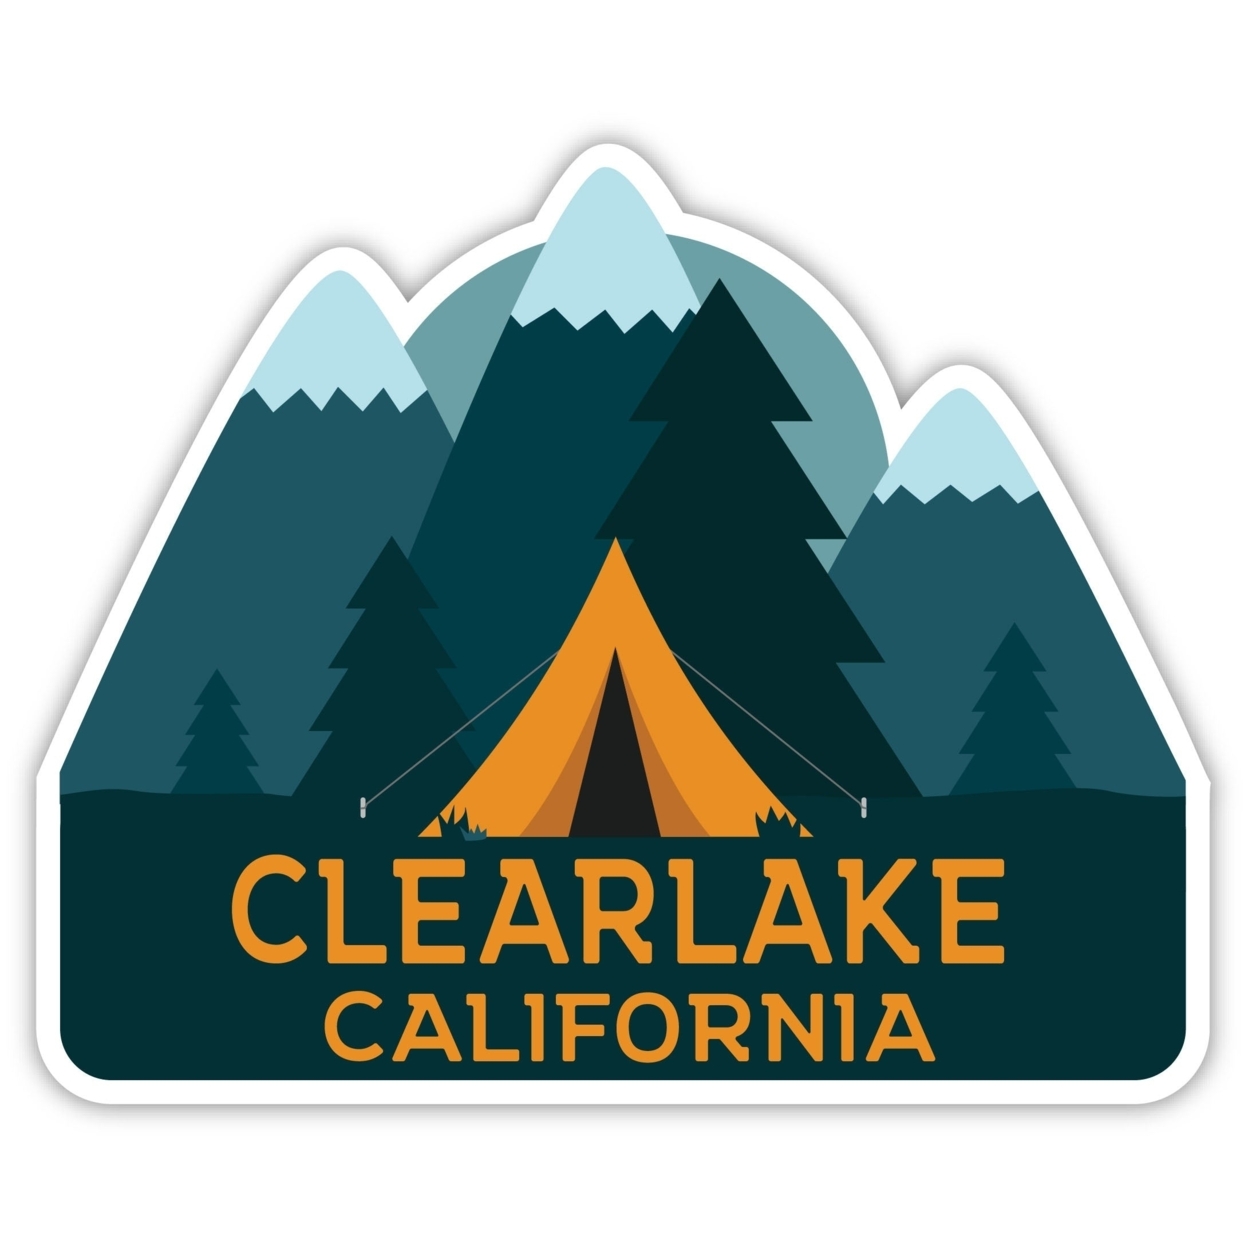 Clearlake California Souvenir Decorative Stickers (Choose Theme And Size) - 4-Pack, 10-Inch, Bear